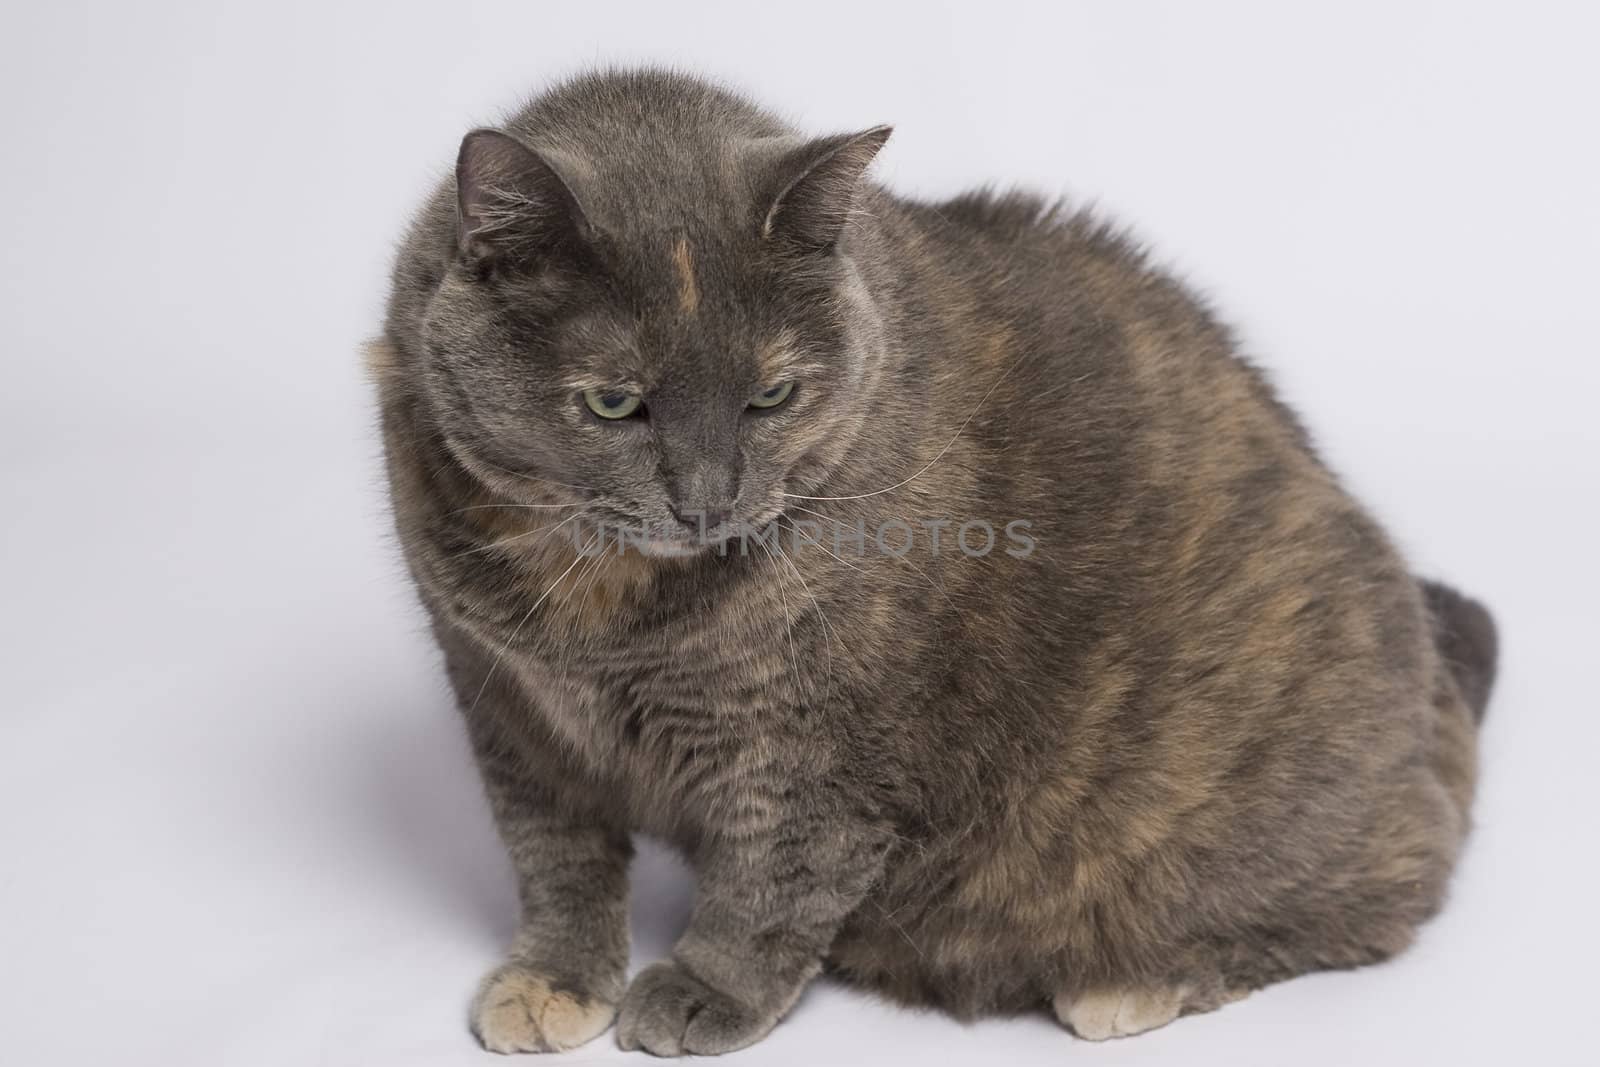 Gray and beige cat with angry expression